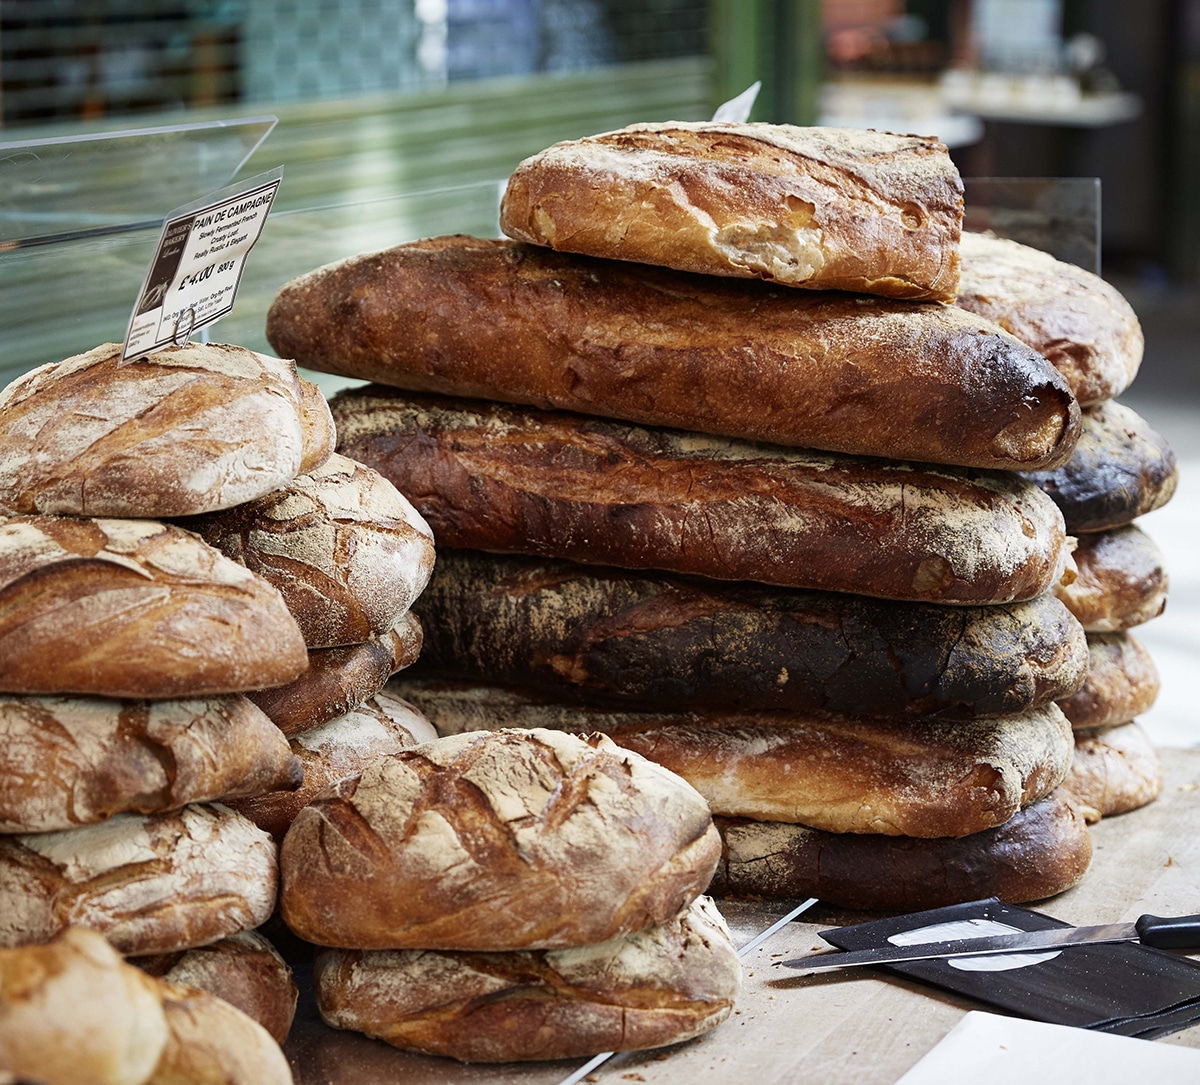 Bread piled up at the Olivier's Bakery stall in Borough Market